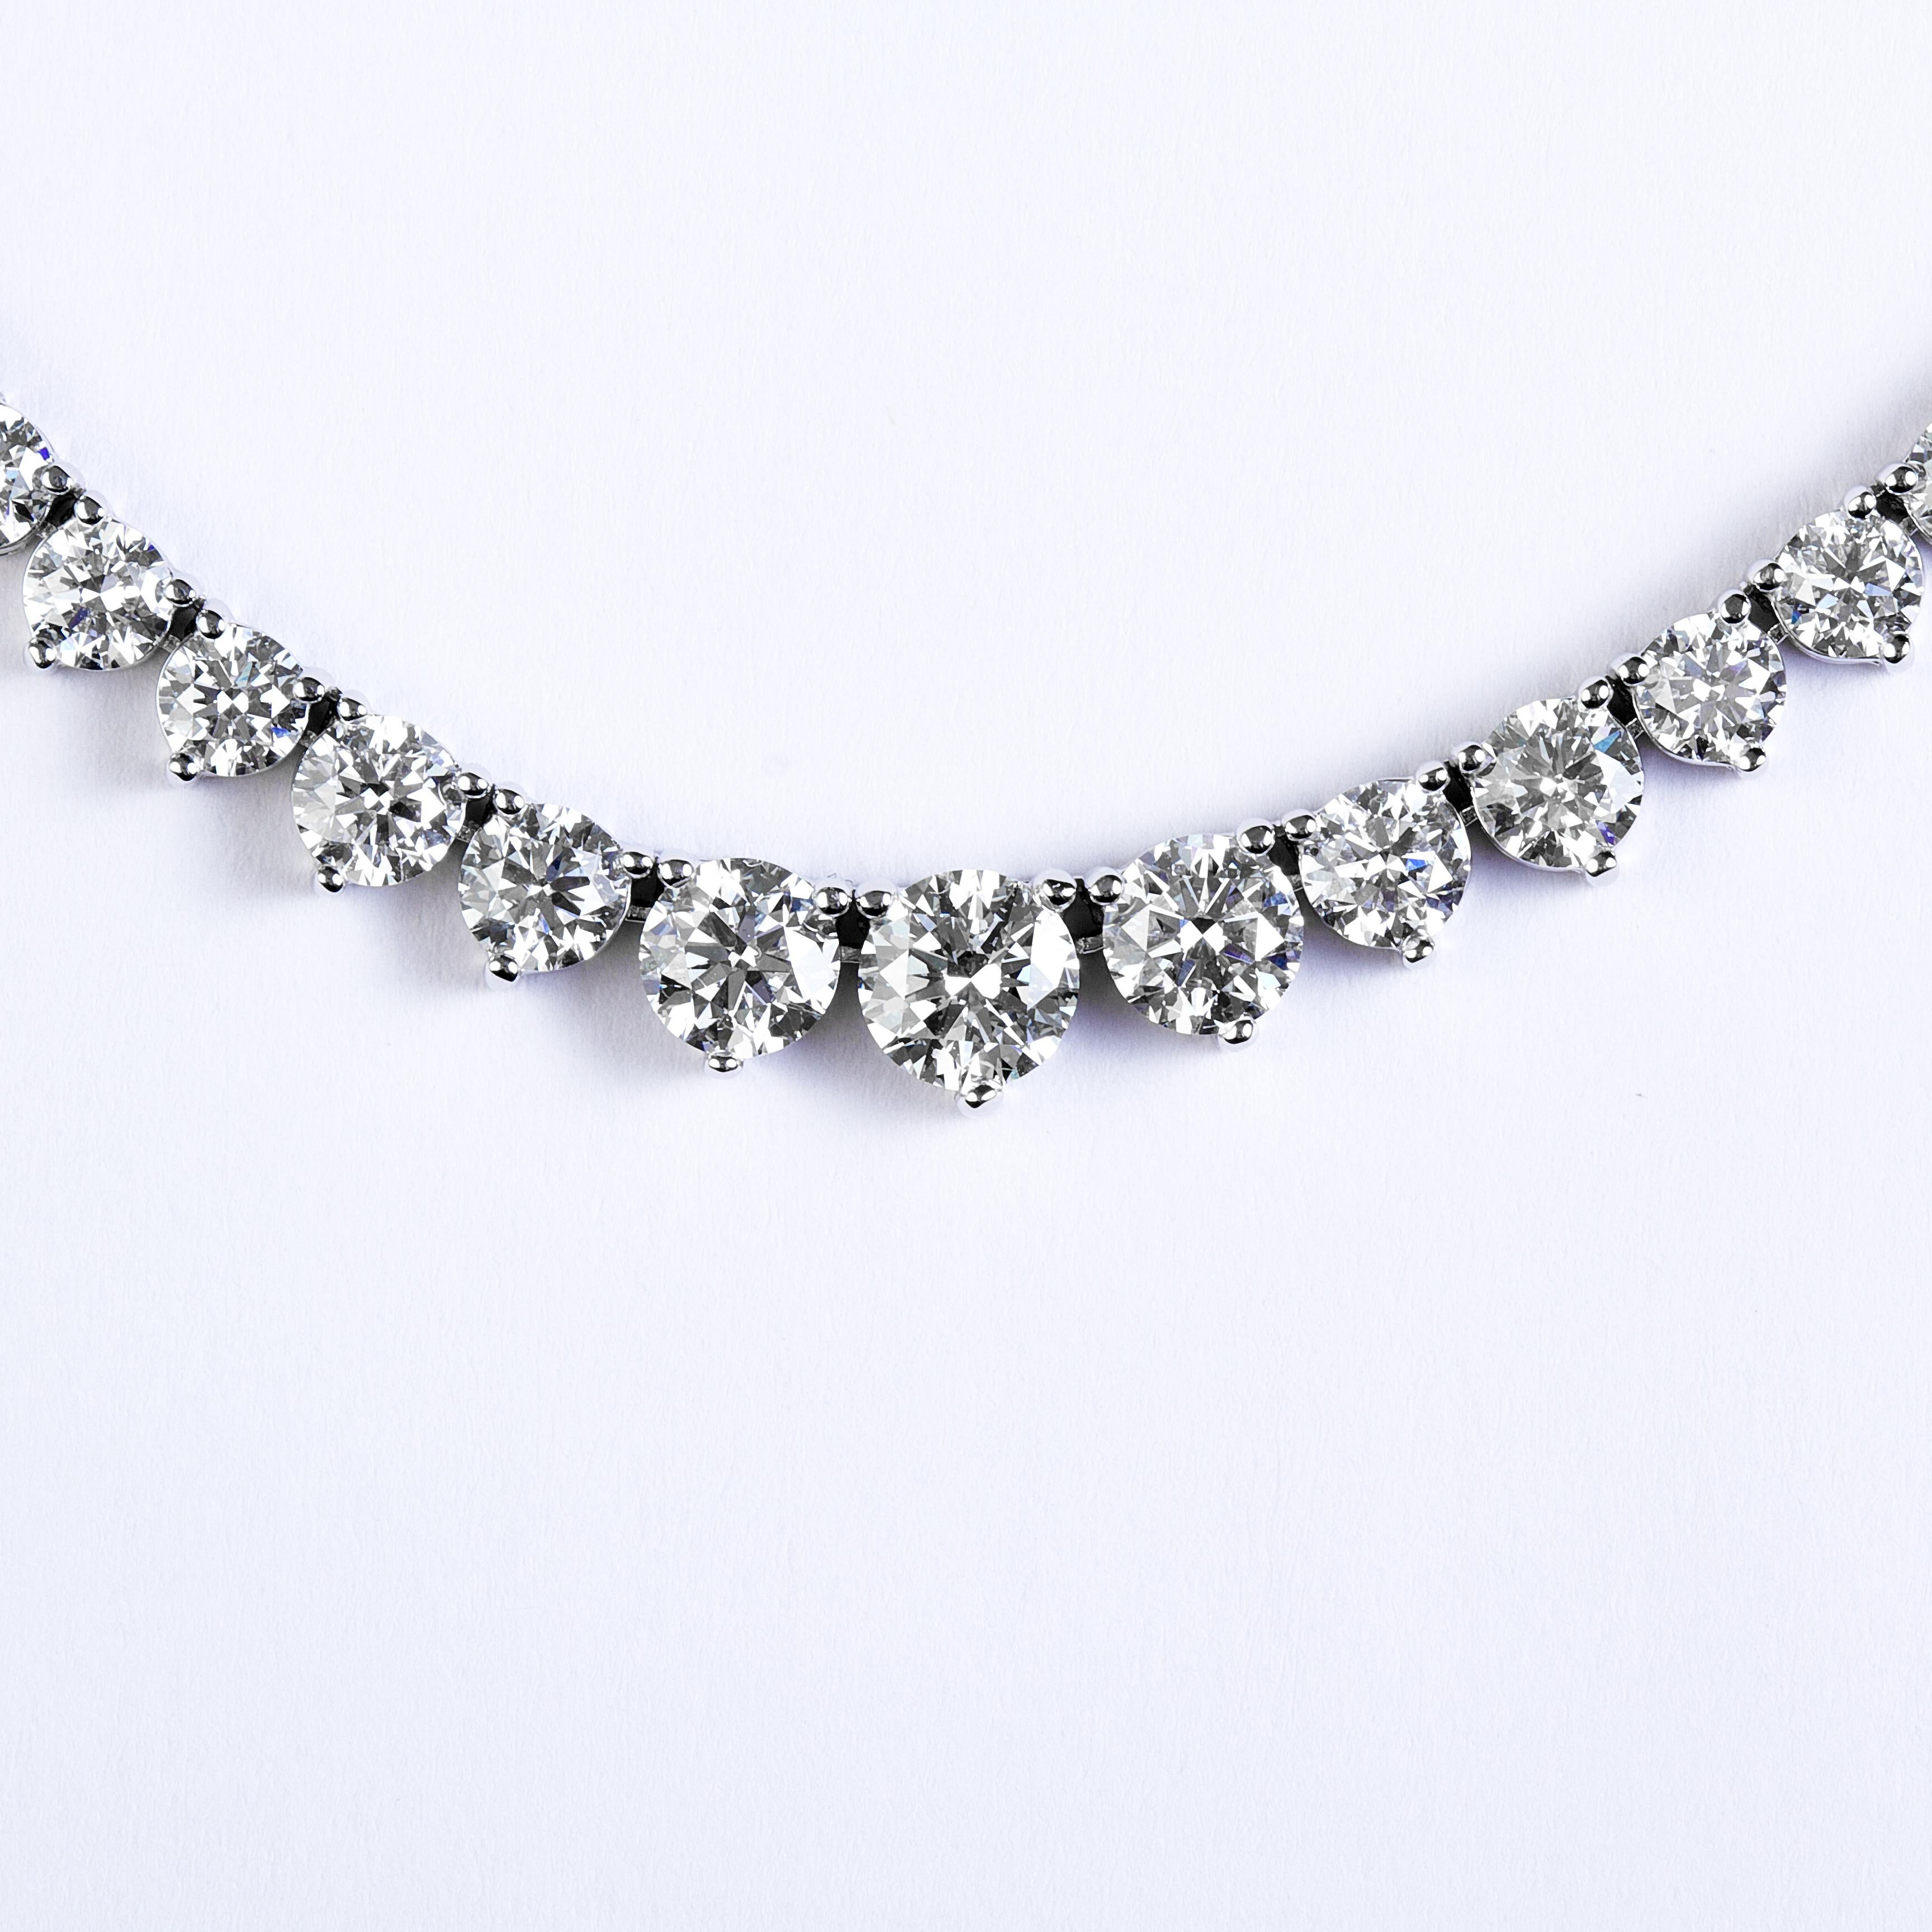 This exquisite graduated riviera necklace set in handmade 18k white gold featuring perfectly cut ideal round brilliant diamonds. the super white diamonds are in g-h-I color and VS2 clarity with a total carat weight of 11.90. This precious necklace